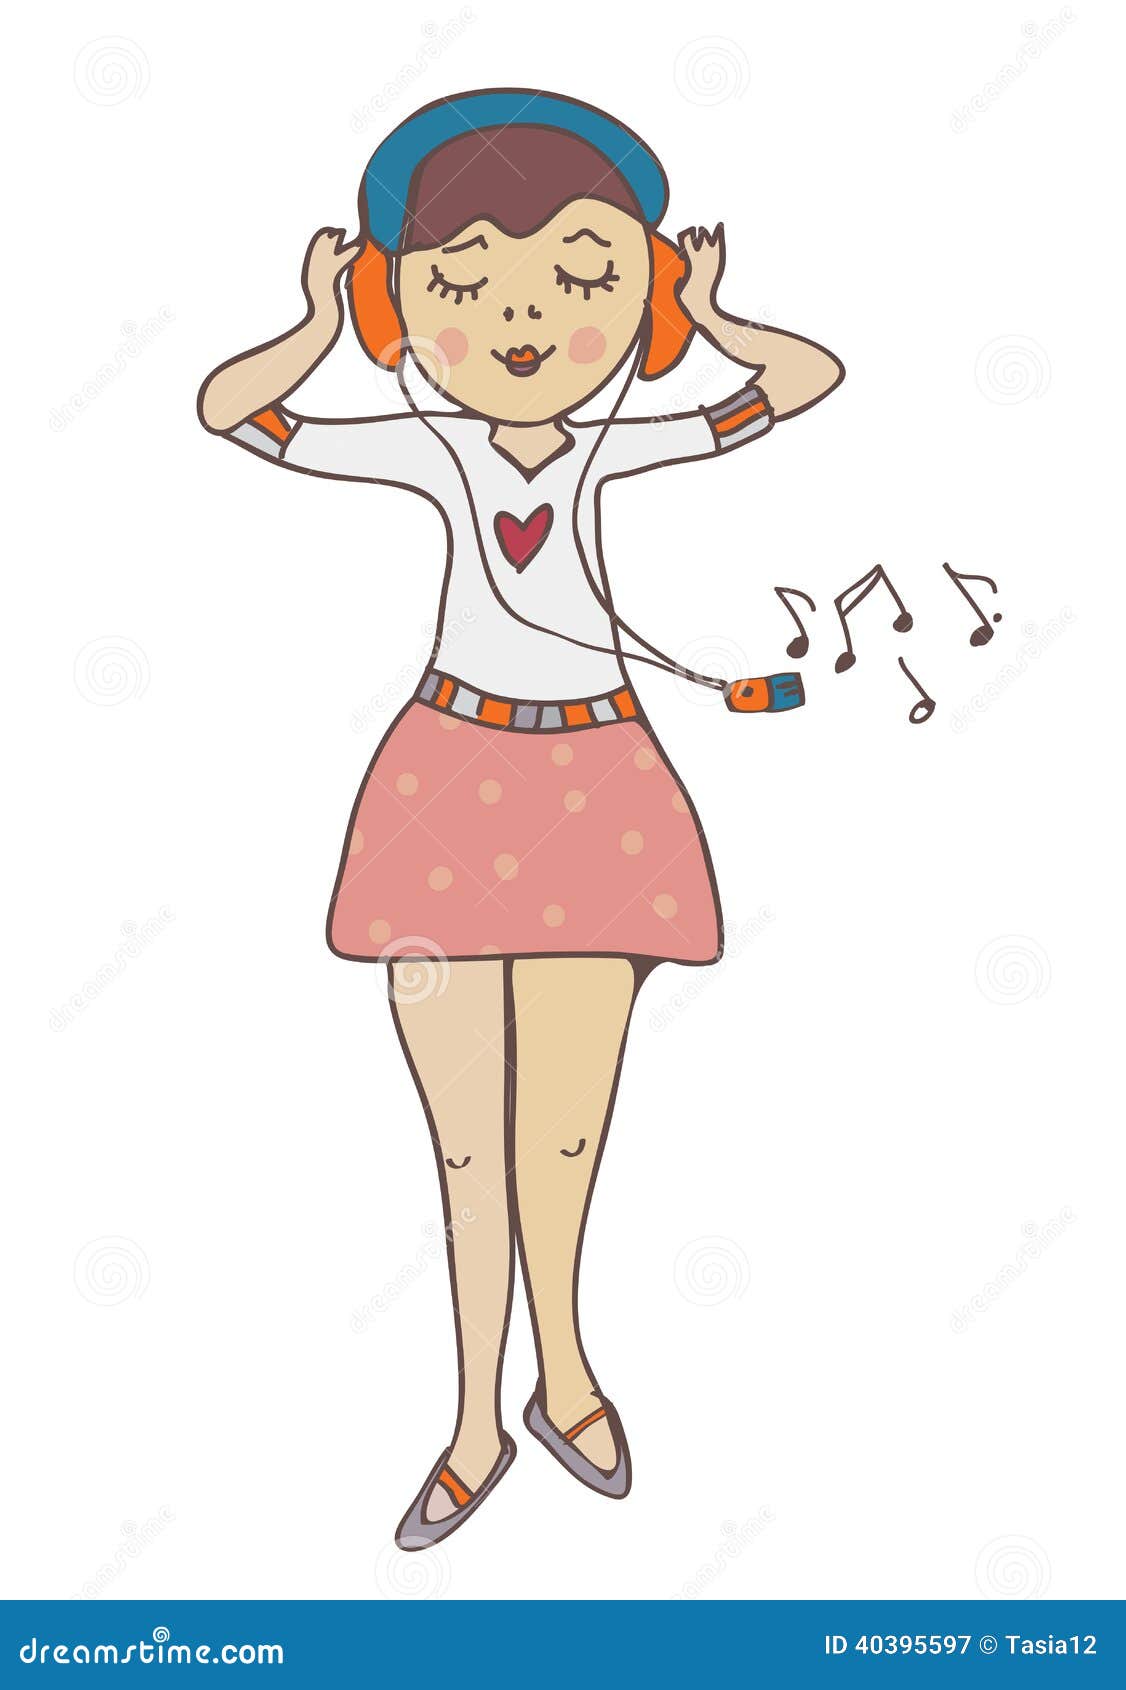 Girl Listening To Music Funny Cartoon Stock Vector - Illustration of drawn,  background: 40395597